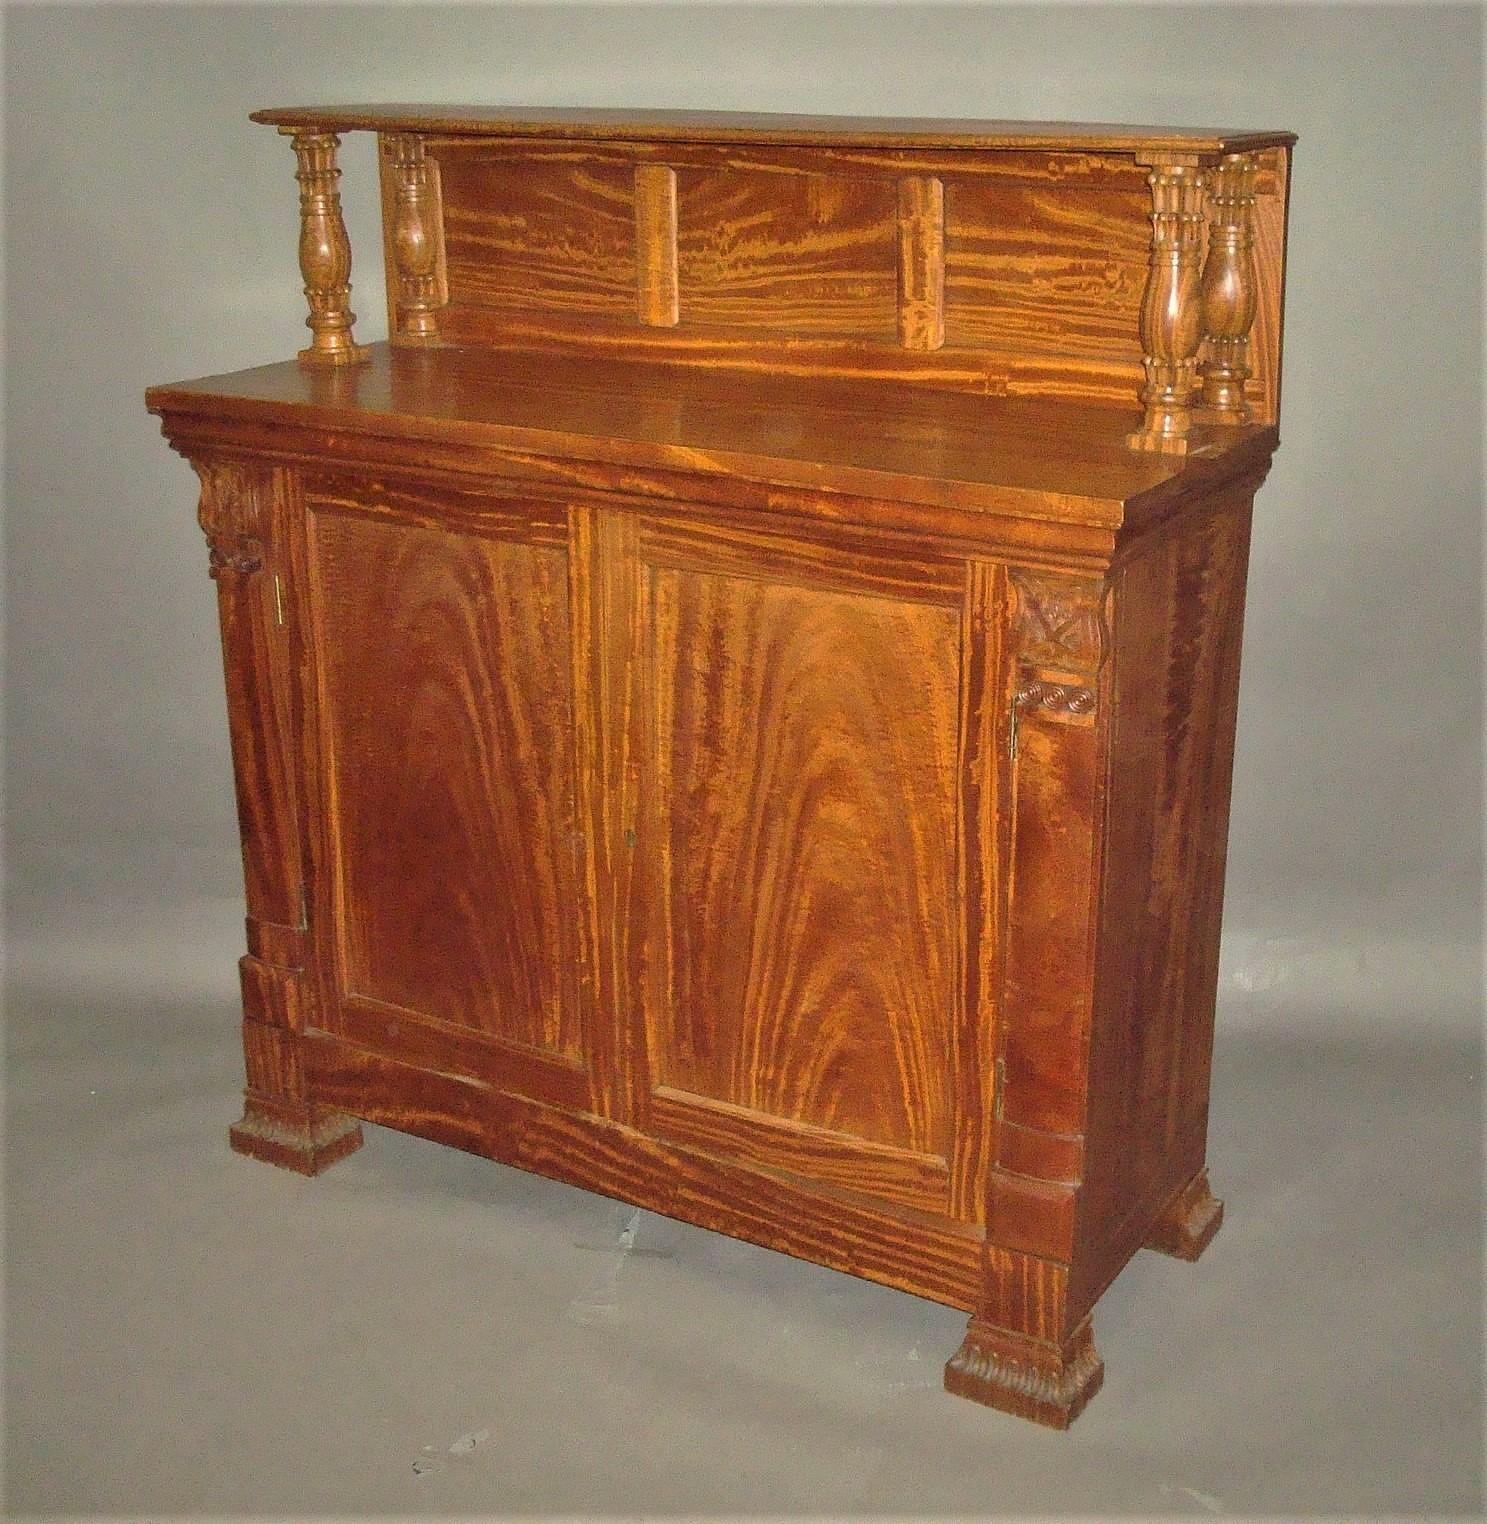 Polished Good Mid-19th Century Anglo-Indian Solid Satinwood Chiffonier For Sale